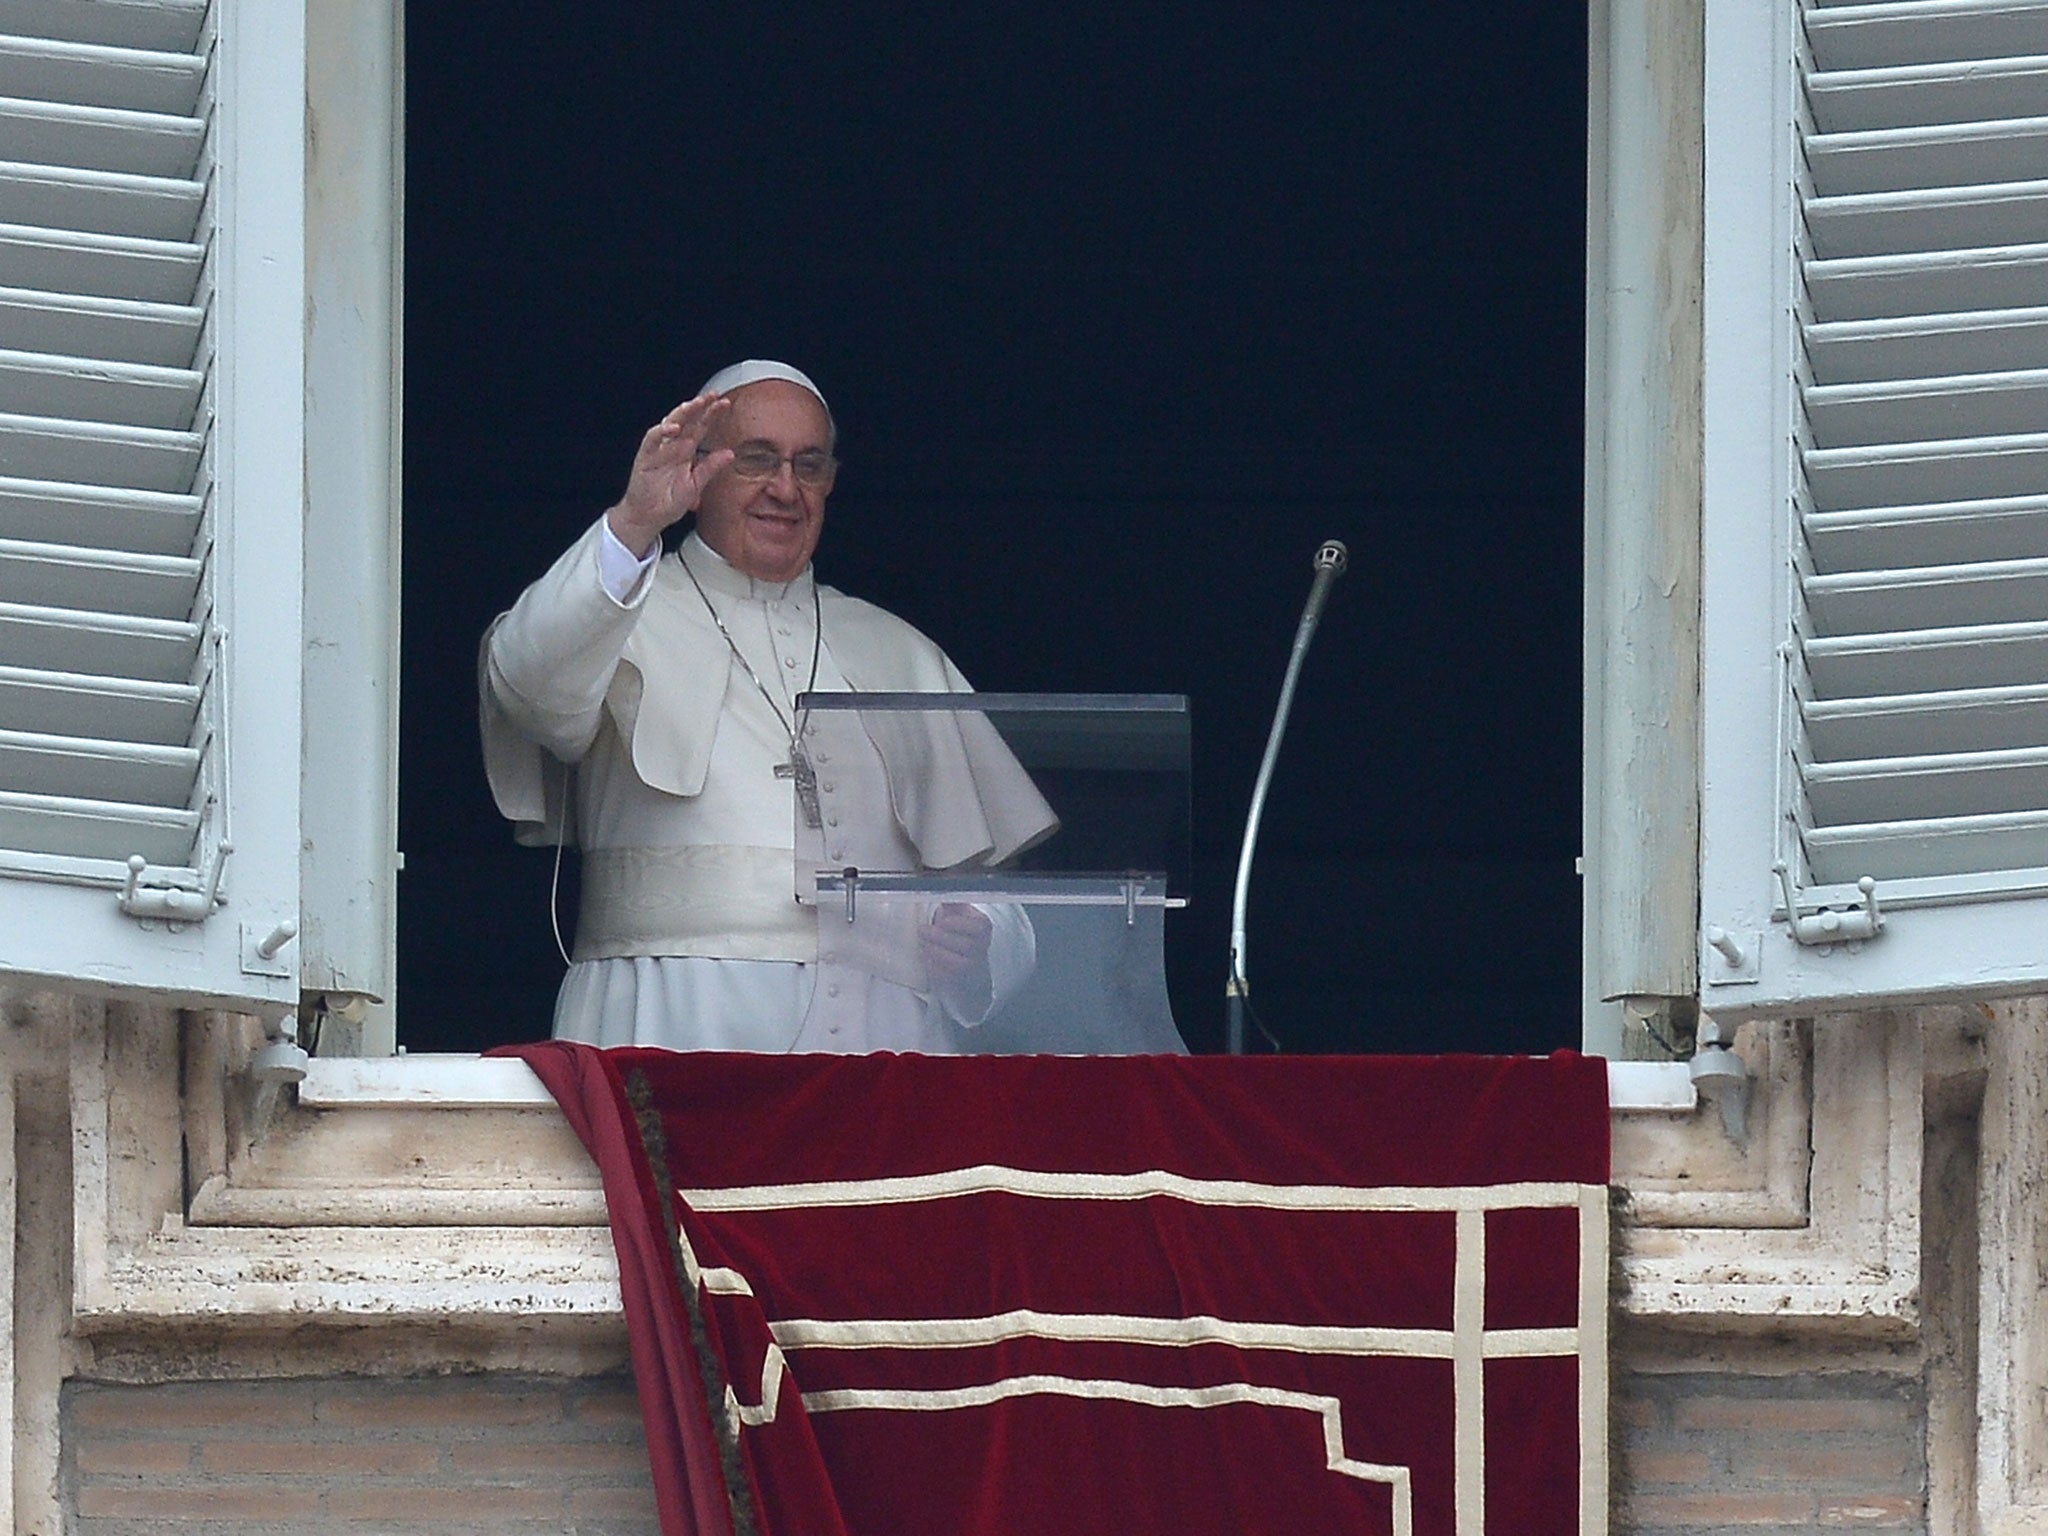 Pope Francis addresses the crowd from his private apartments during his Sunday's Angelus noon prayer at St Peter's square on 23 March